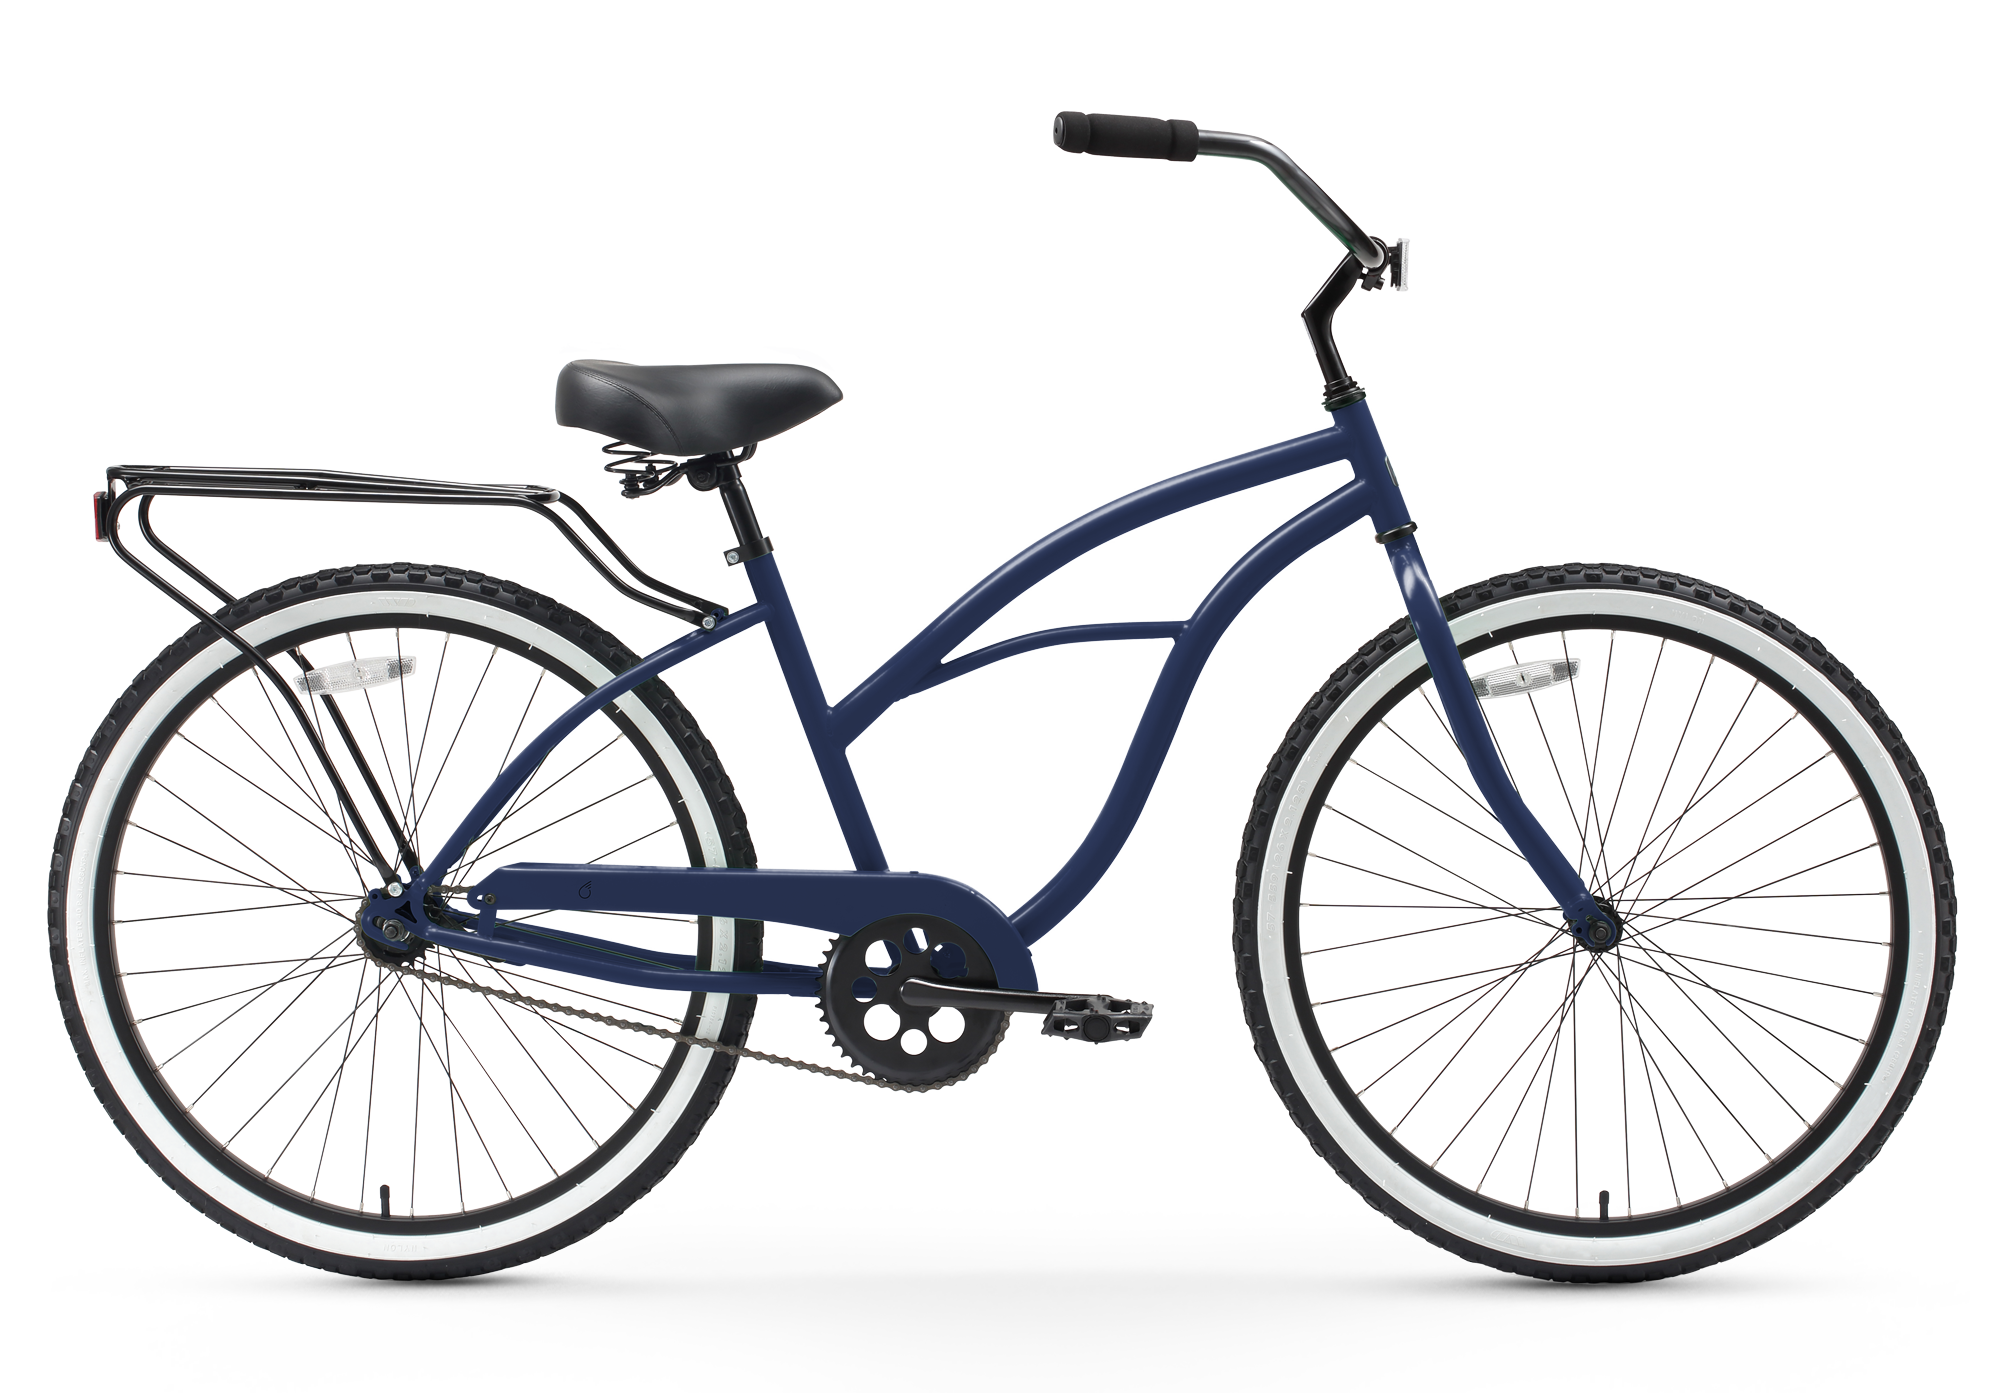 YUEBM Adult Shimano 7 Speed Cruiser Bikes,26 Inch Ladies City Bicycle,with Bell and Assembly Tool,Women Commuter Bike 